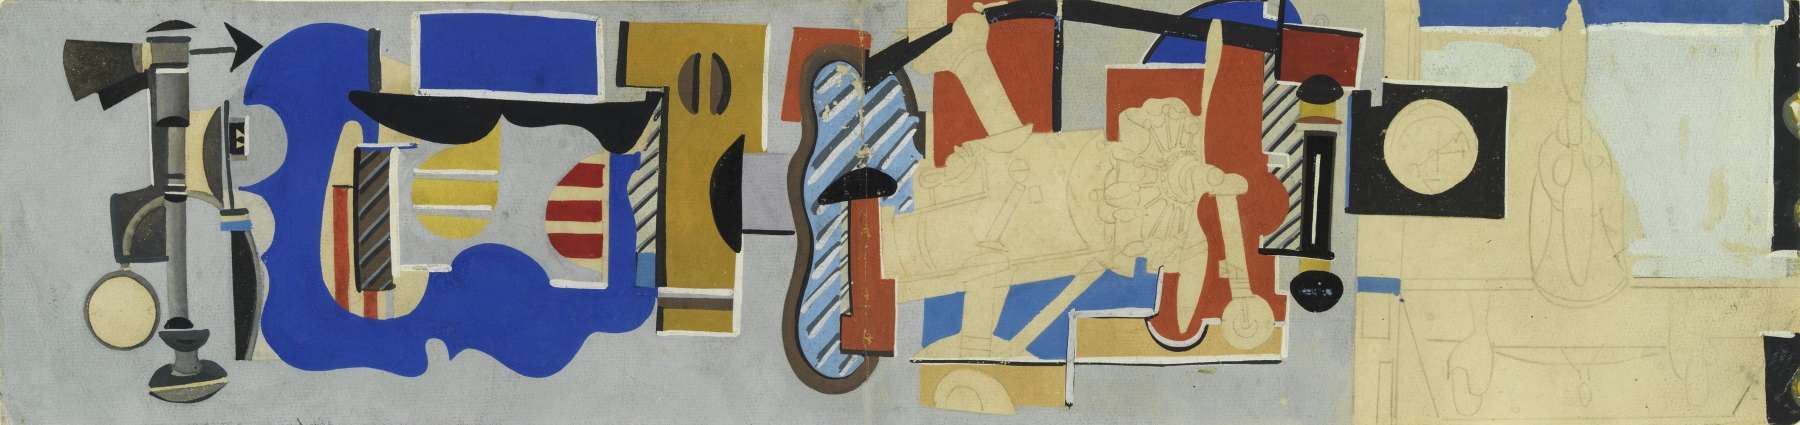 Abstract composition with nautical and aviation motifs including propellors, engines, and planes rendered predominately in blue and gray